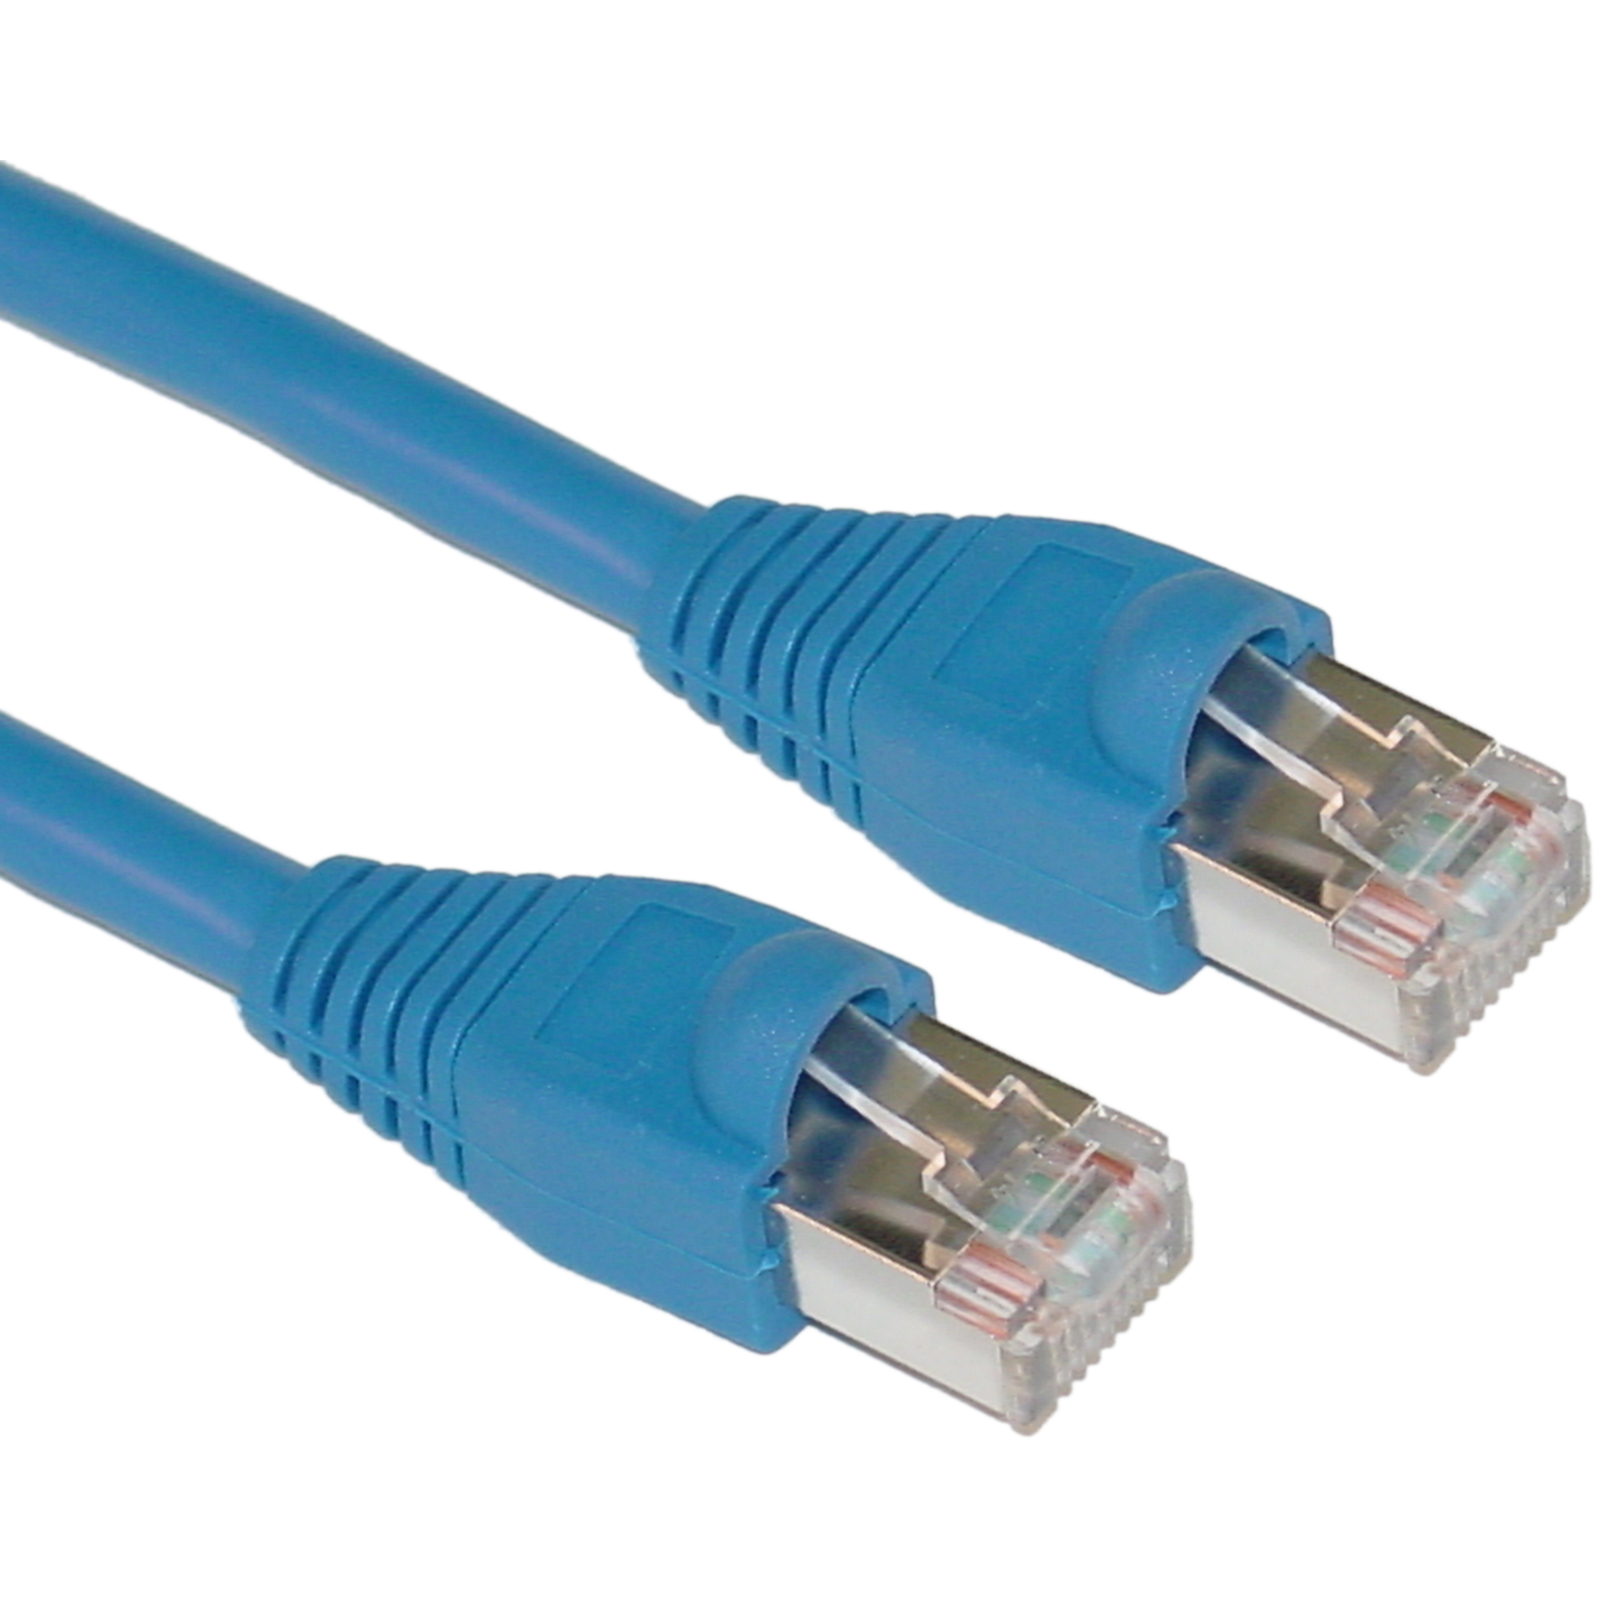 HFCAB-CAT5-CSS: 1ft to 100ft RJ45 Cat5e shielded patch cable stranded